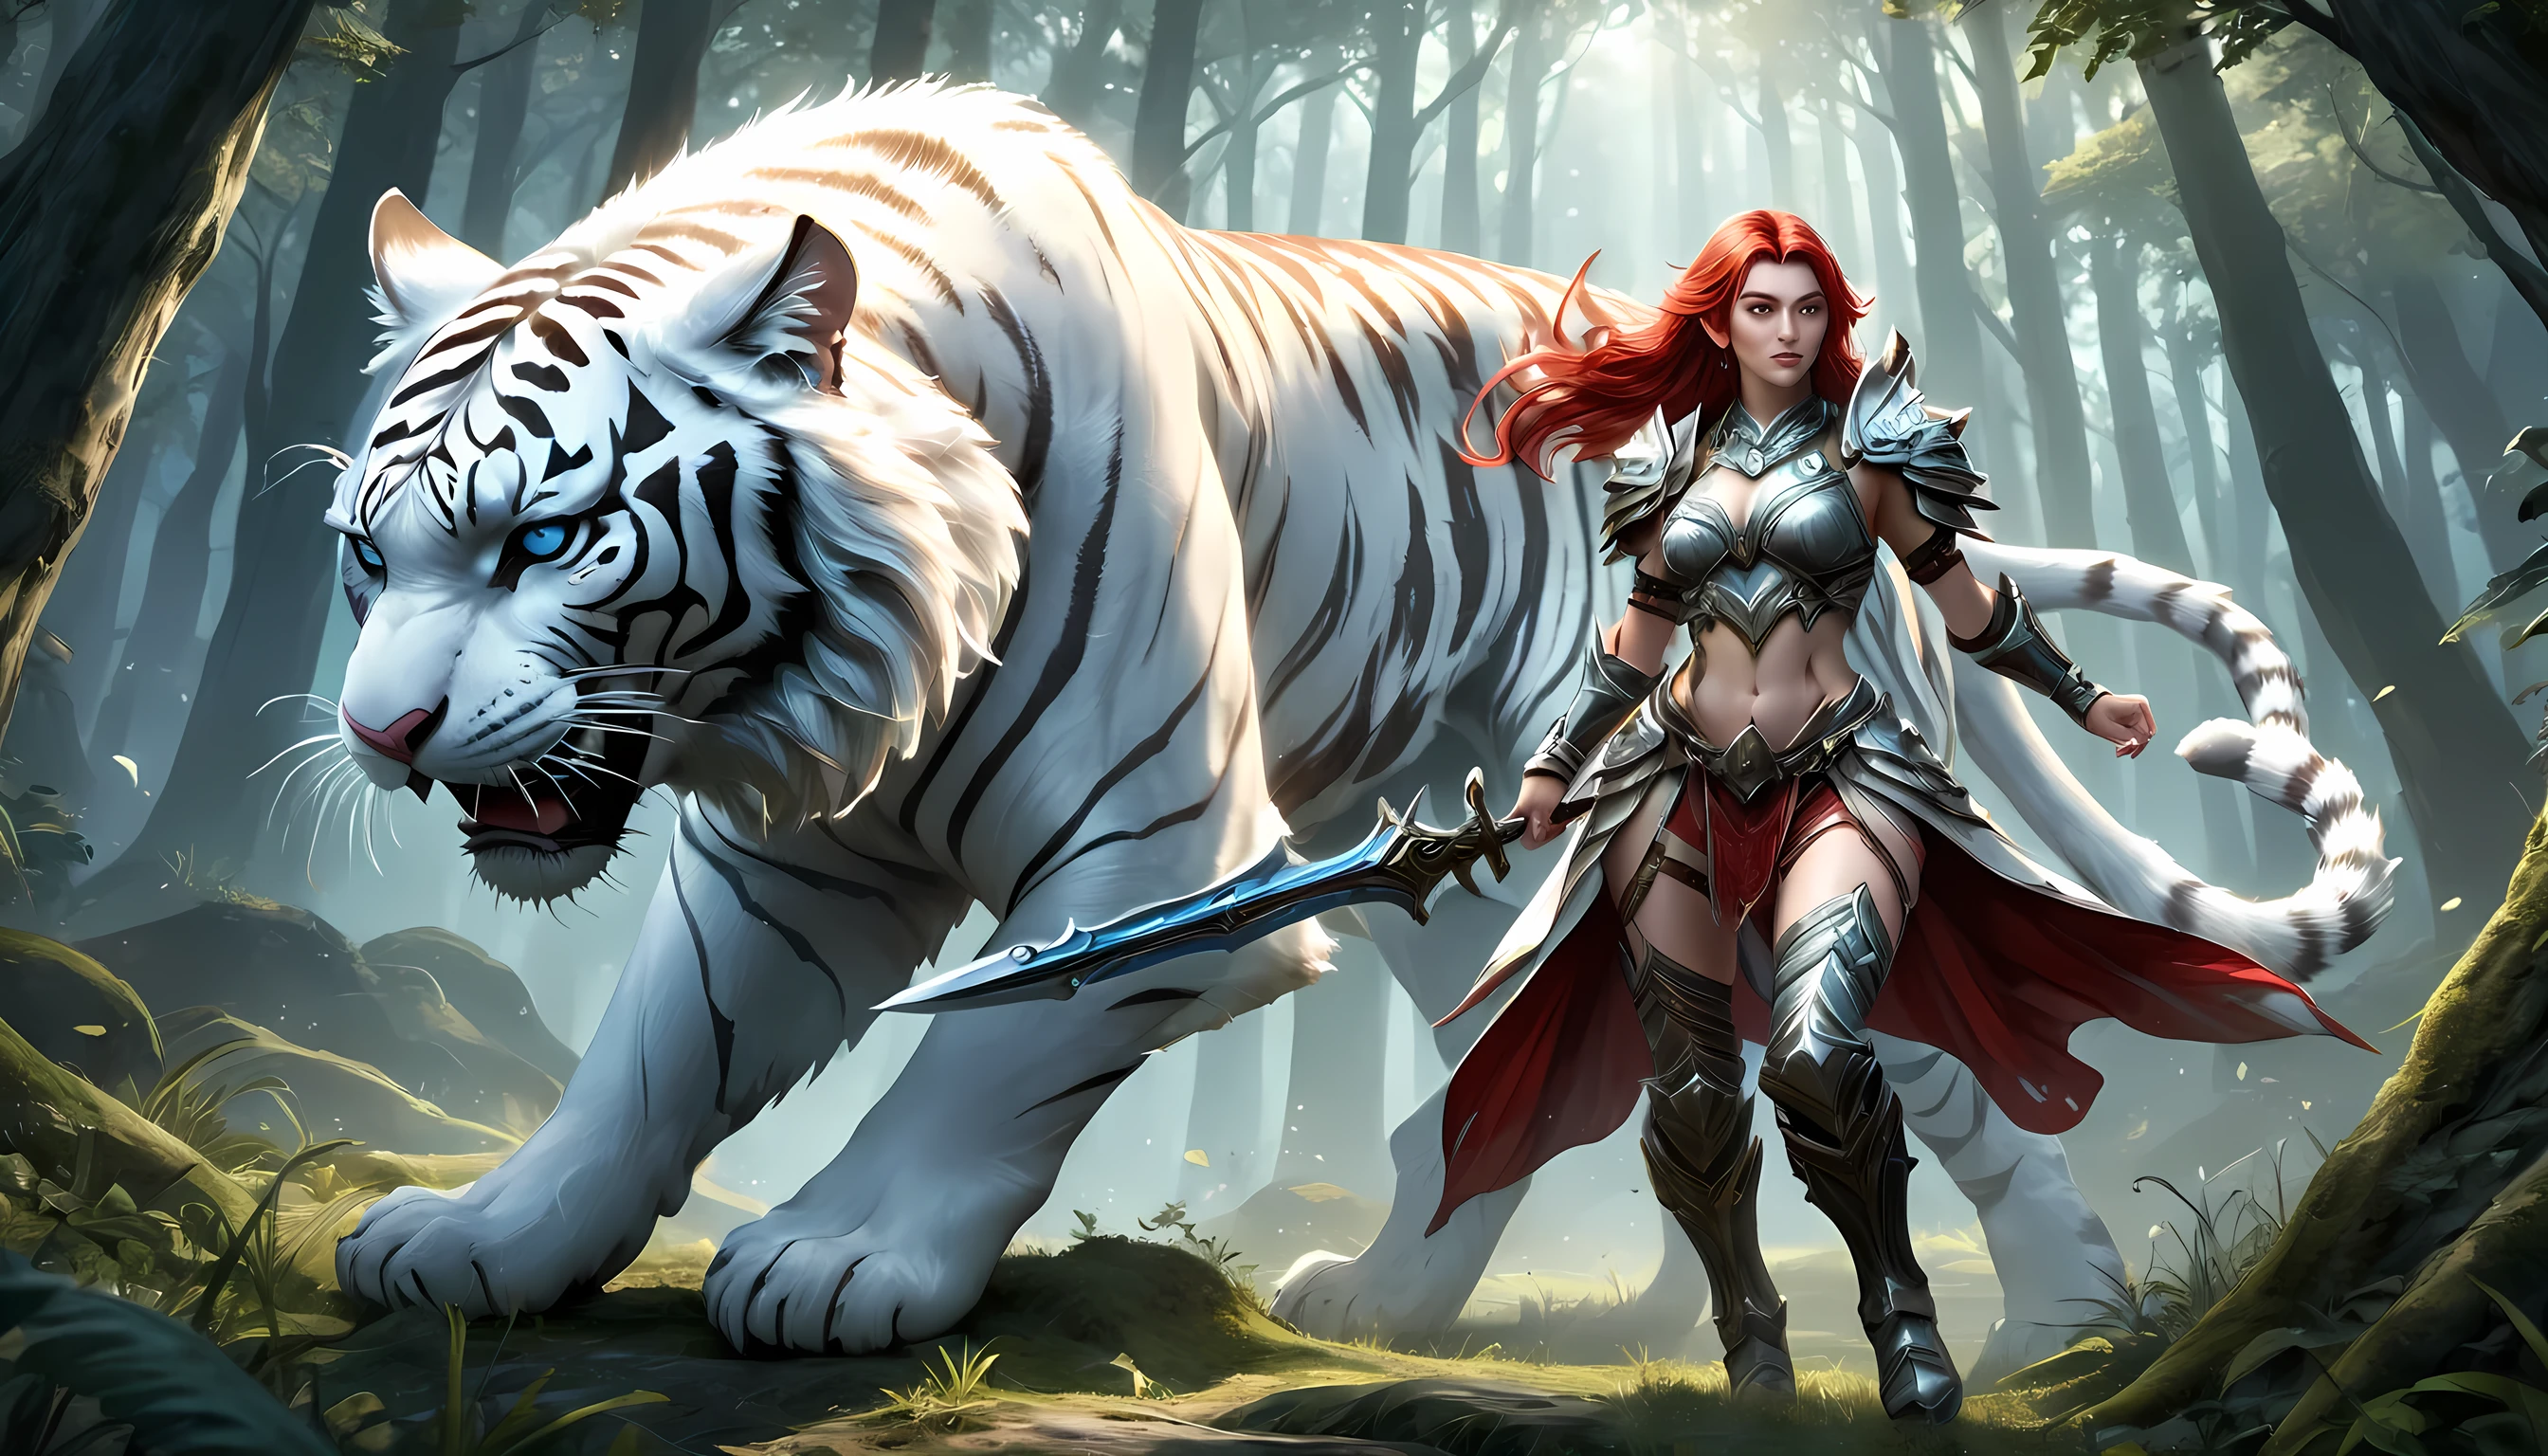 high details, best quality, 16k, [Ultra detailed], masterpiece,  best quality, (extremely detailed), dynamic angle, ultra wide shot, RAW, photorealistic, fantasy art, RPG art, realistic art, a wide angle picture of an epic female elf ranger and her pet (white tiger: 1.3),  warrior of nature, fighter of nature, full body, [[anatomically correct]] full body (intricate details, Masterpiece, best quality: 1.5) talking to an epic ((white tiger: 1.5)) (intricate details, Masterpiece, best quality: 1.6) armed with an epic magical sword  (intricate details, Masterpiece, best quality: 1.5) epic magical sword Wielding sword, glowing in blue light , in dark forest ( intricate details, Masterpiece, best quality: 1.4), a female beautiful epic drow wearing leather armor (intricate details, Masterpiece, best quality: 1.5), leather boots, thick hair, long hair, red hair, pale skin intense eyes, forest  background (intense details), moon light, stars light, clouds (intricate details, Masterpiece, best quality: 1.5), dynamic angle, (intricate details, Masterpiece, best quality: 1.3), high details, best quality, highres, ultra wide angle, ladyshadow, 